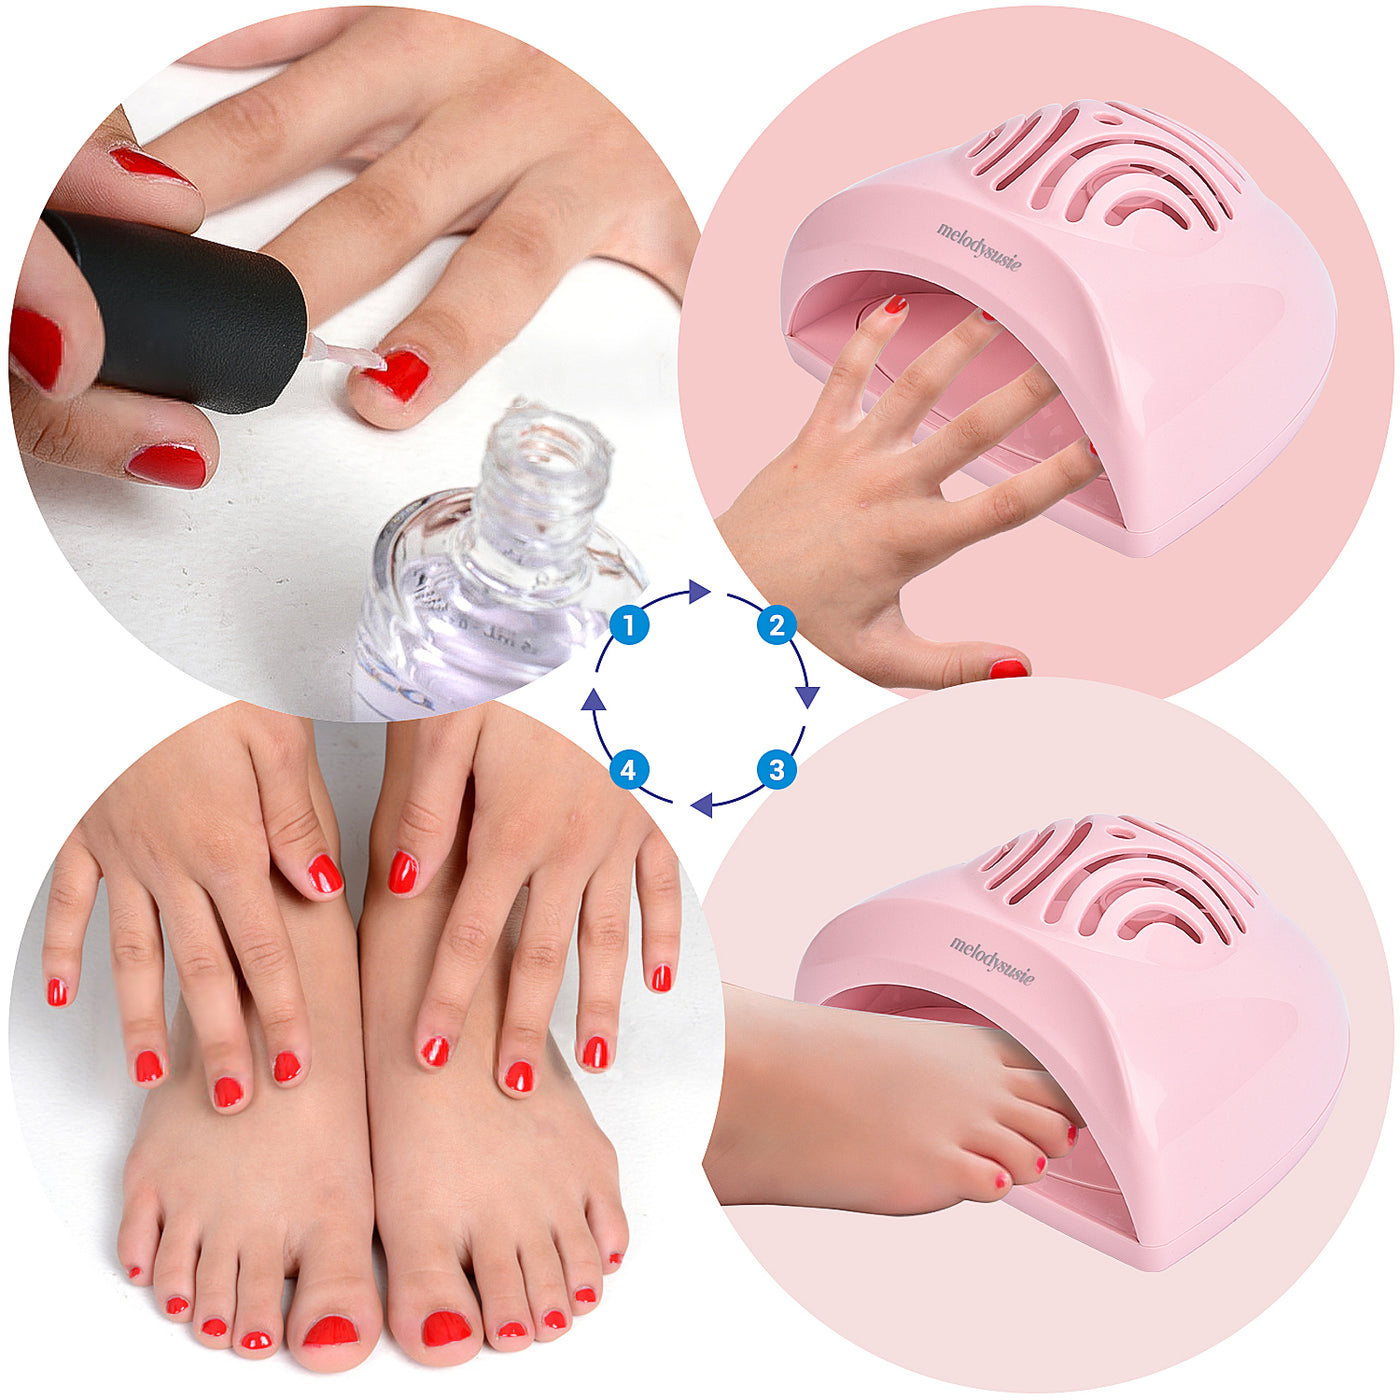 Mini Fan Nail Lamp for safe and quick drying nail polishes at home